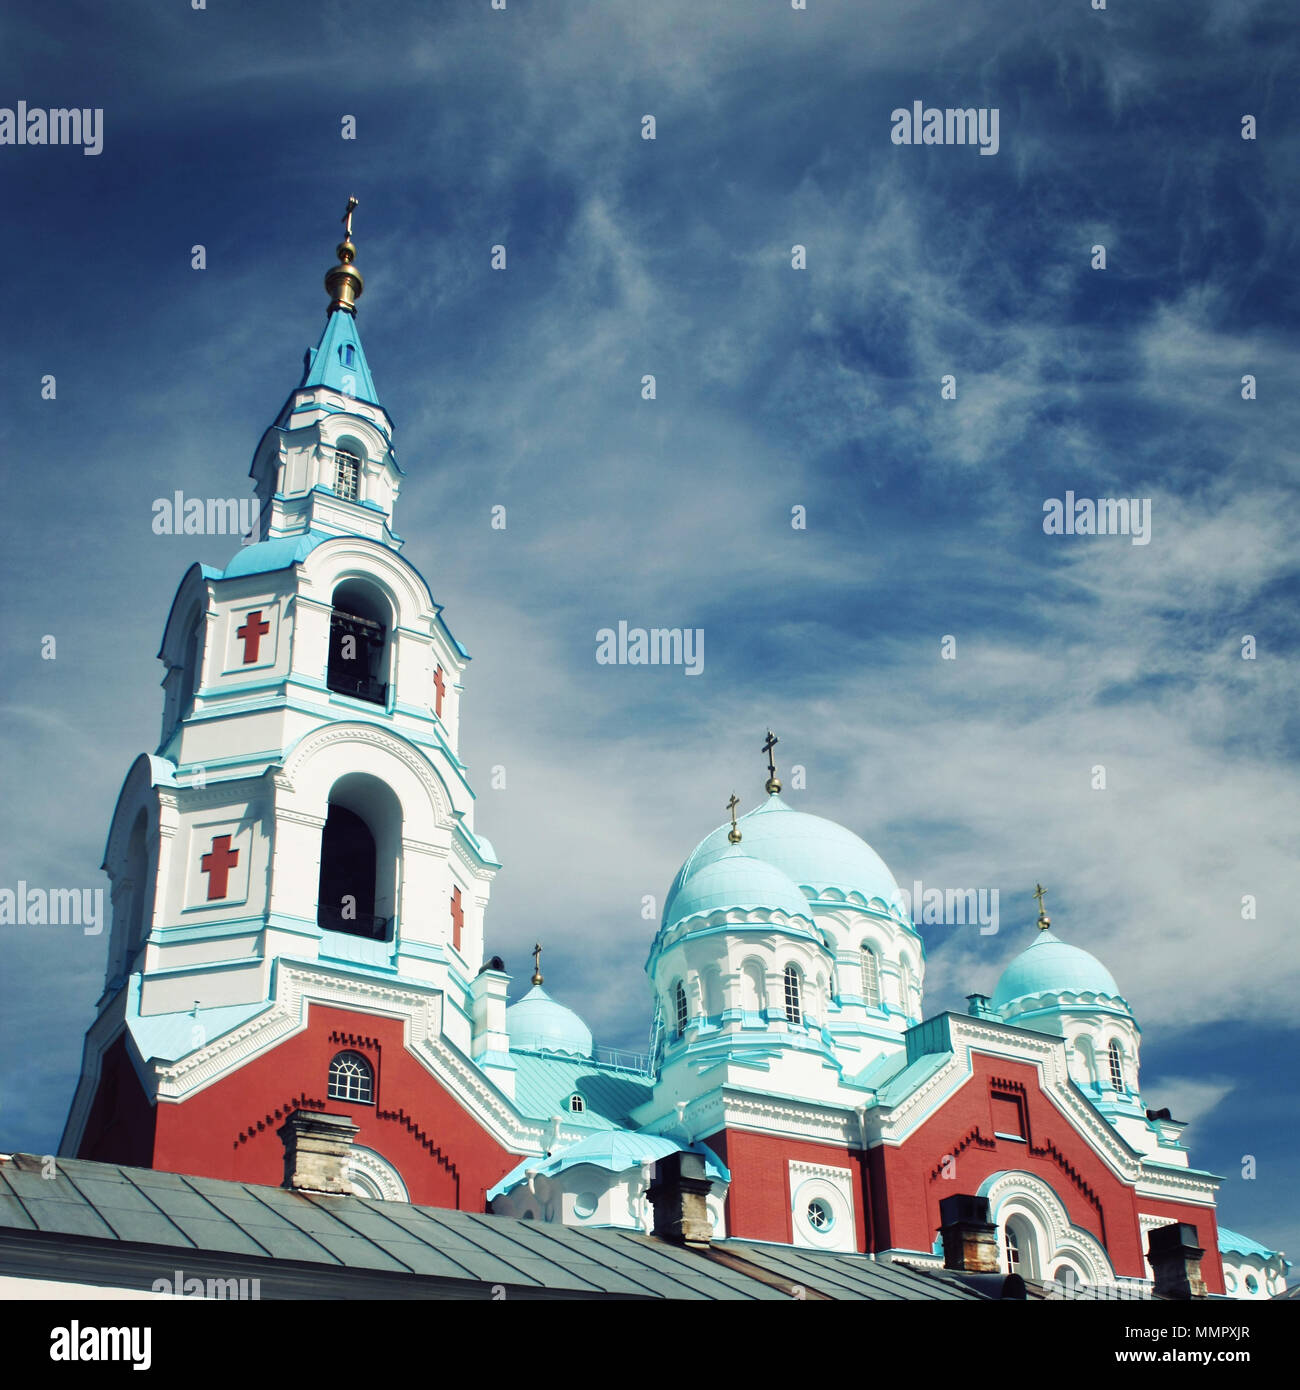 Spaso-Preobrazhensky Cathedral of Valaam Monastery. View from below. Sunny summer day. Aged photo.  Island of Valaam, Republic of Karelya, Russia. Stock Photo